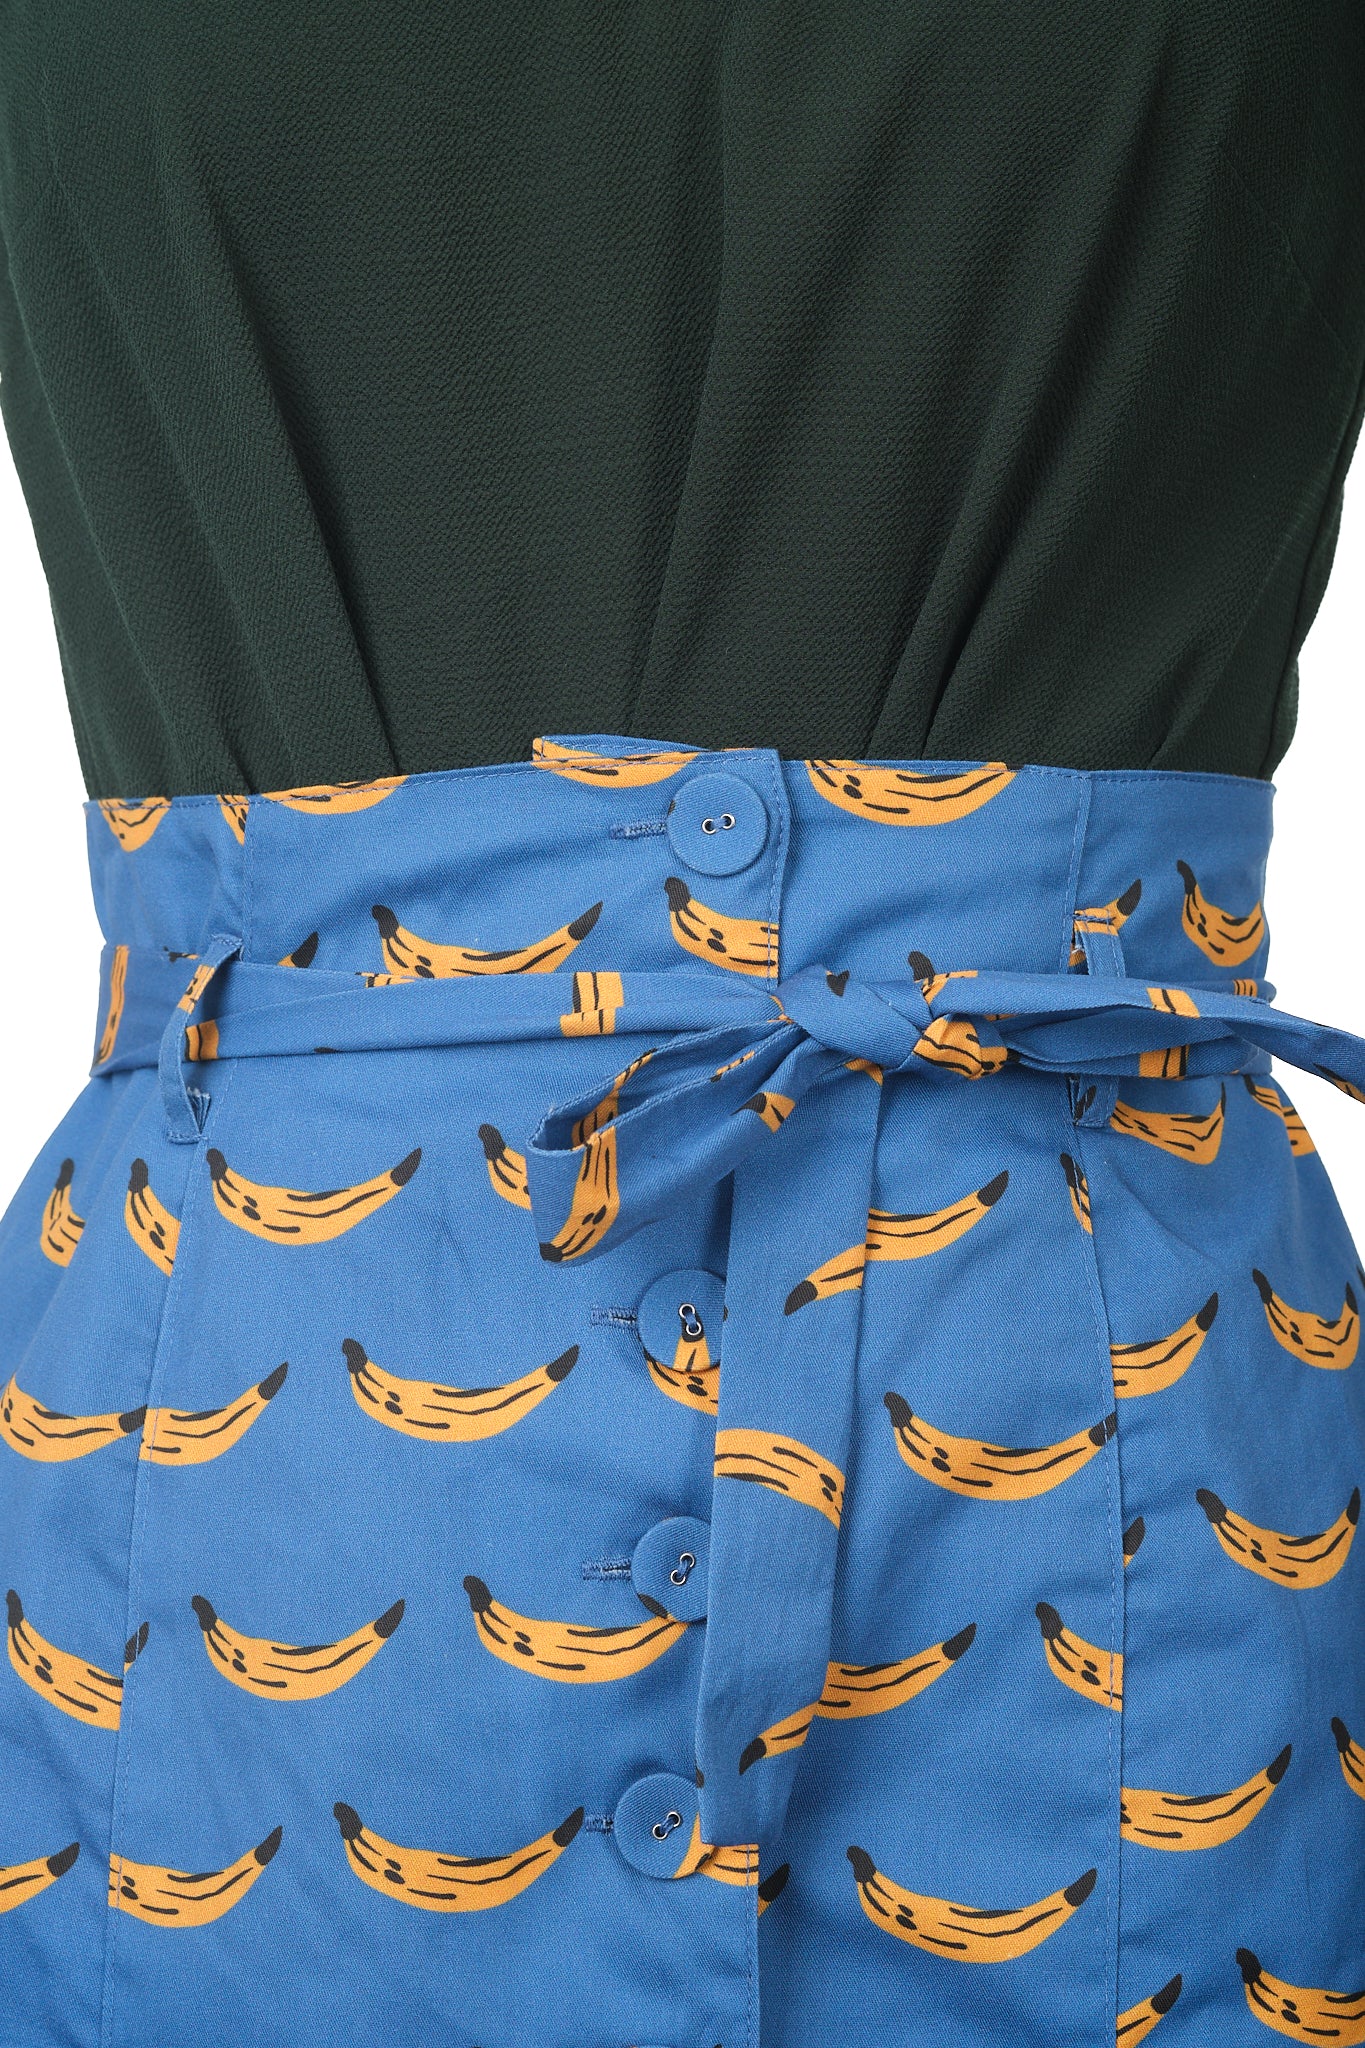 Best Time of my Life Skirt - Banana (last Size 6)